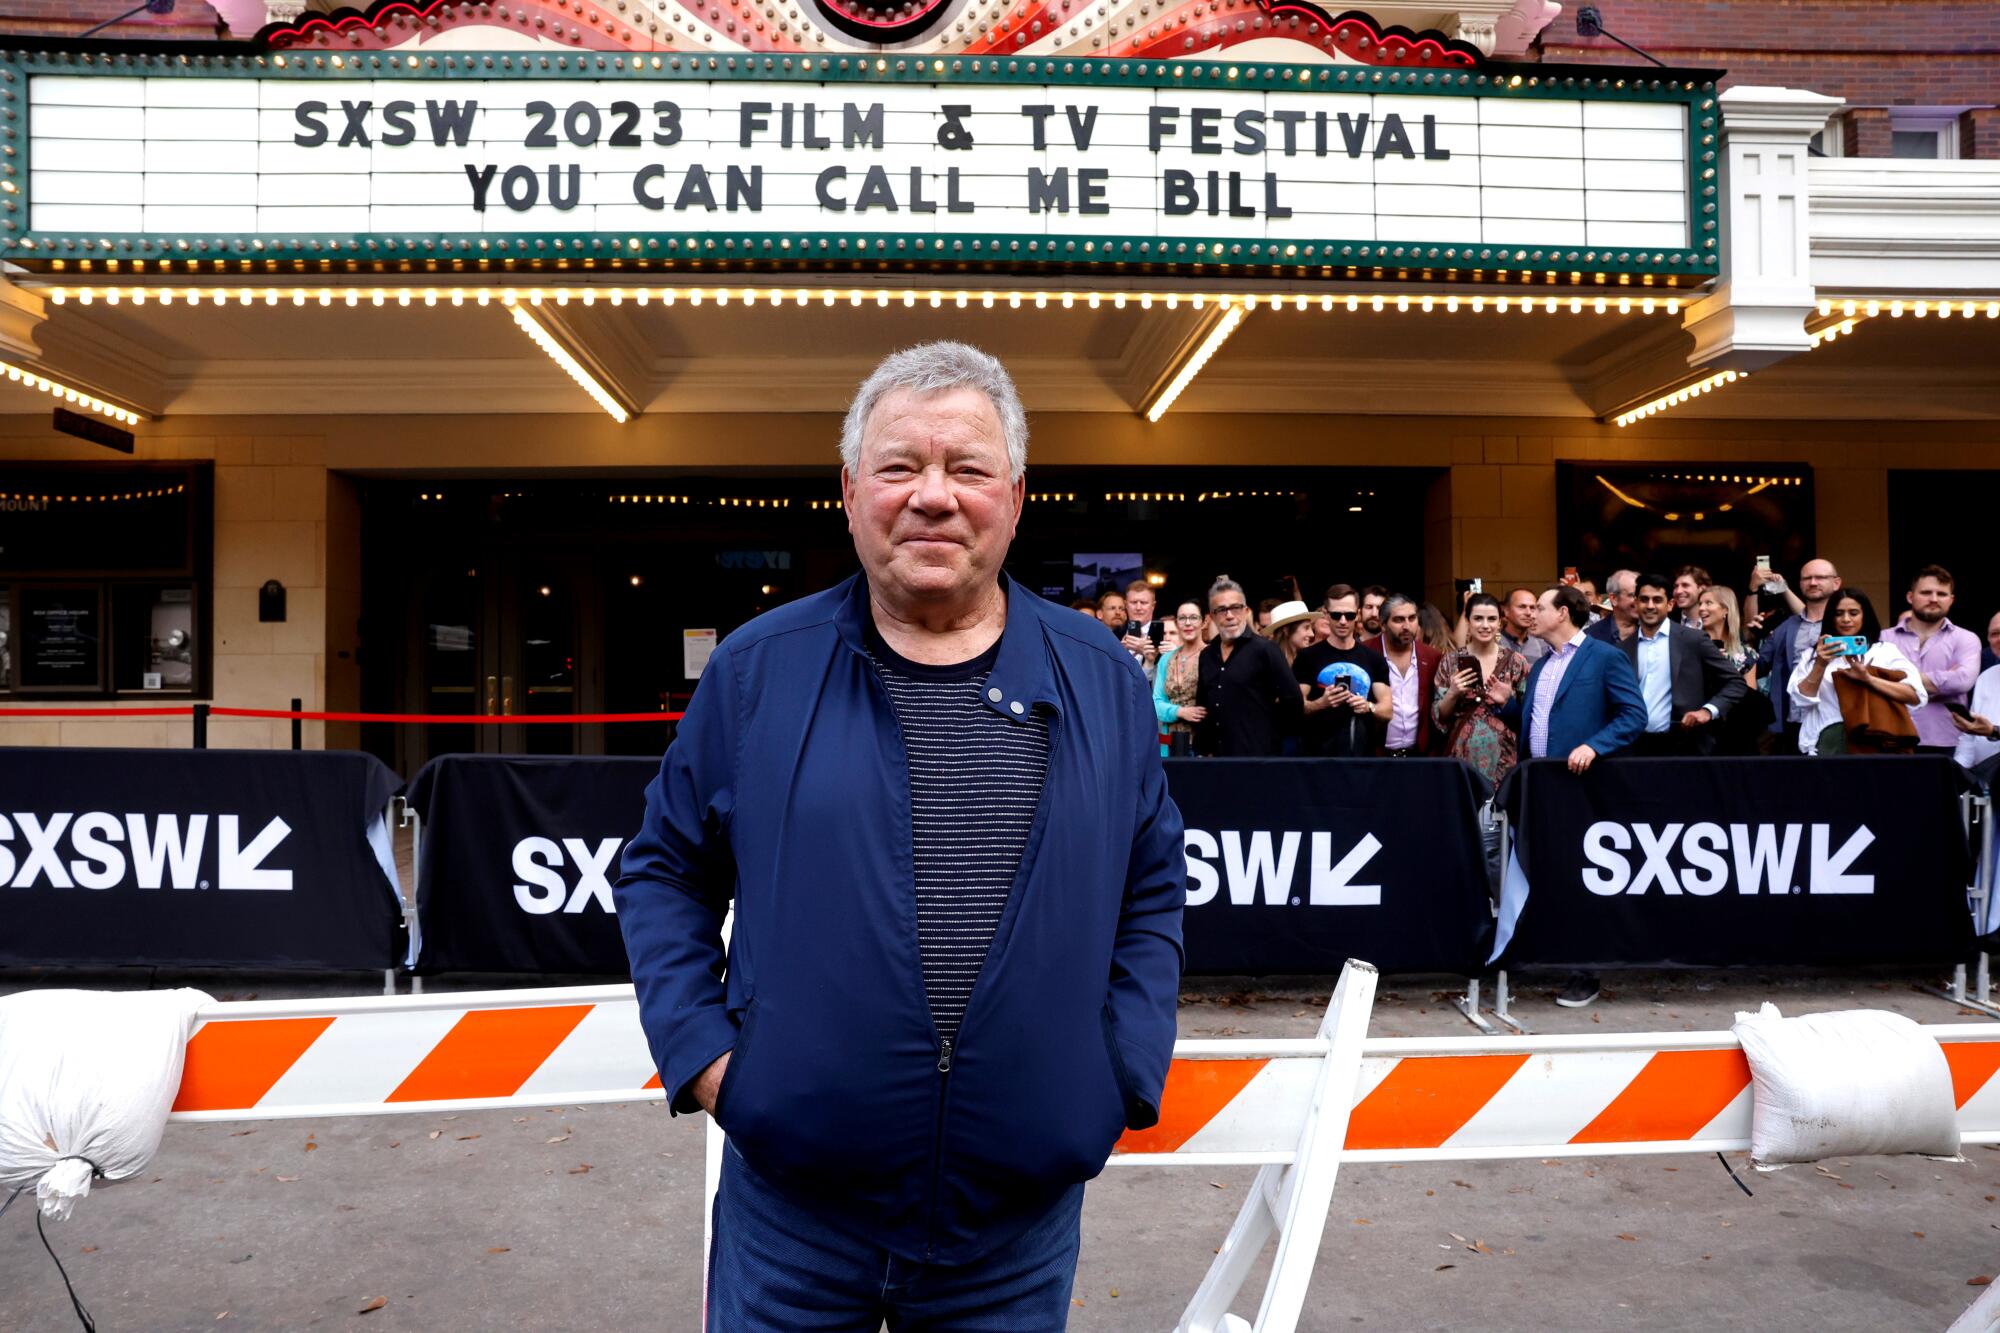 William Shatner stands in front of a movie theater marquee in a blue jacket and black T-shirt.